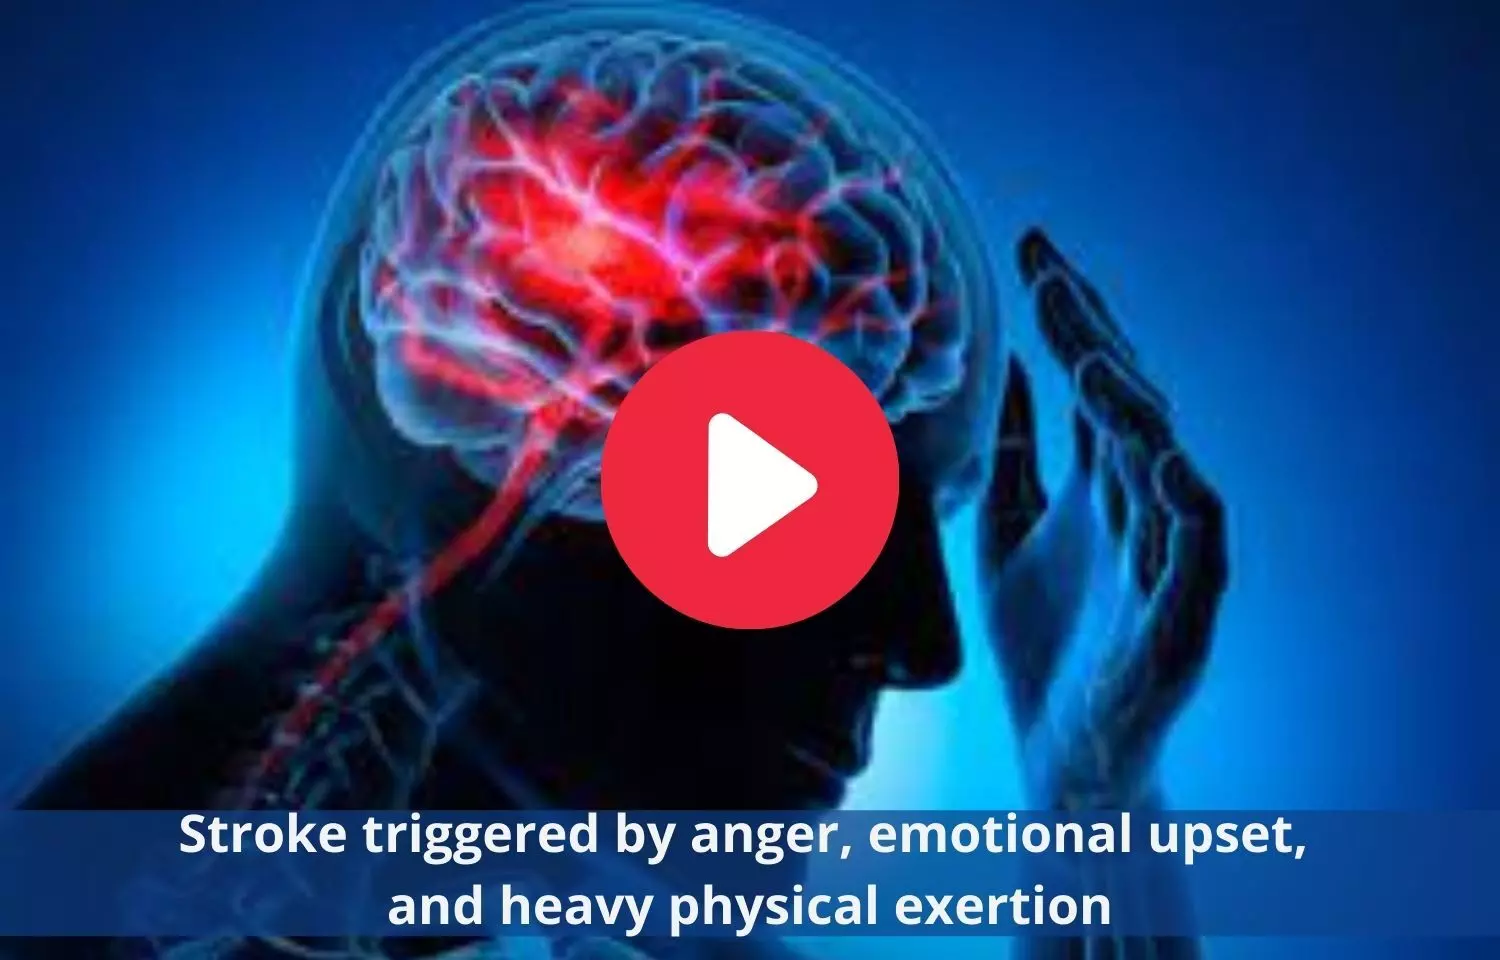 Anger, emotional upset, and heavy physical exertion trigger stroke